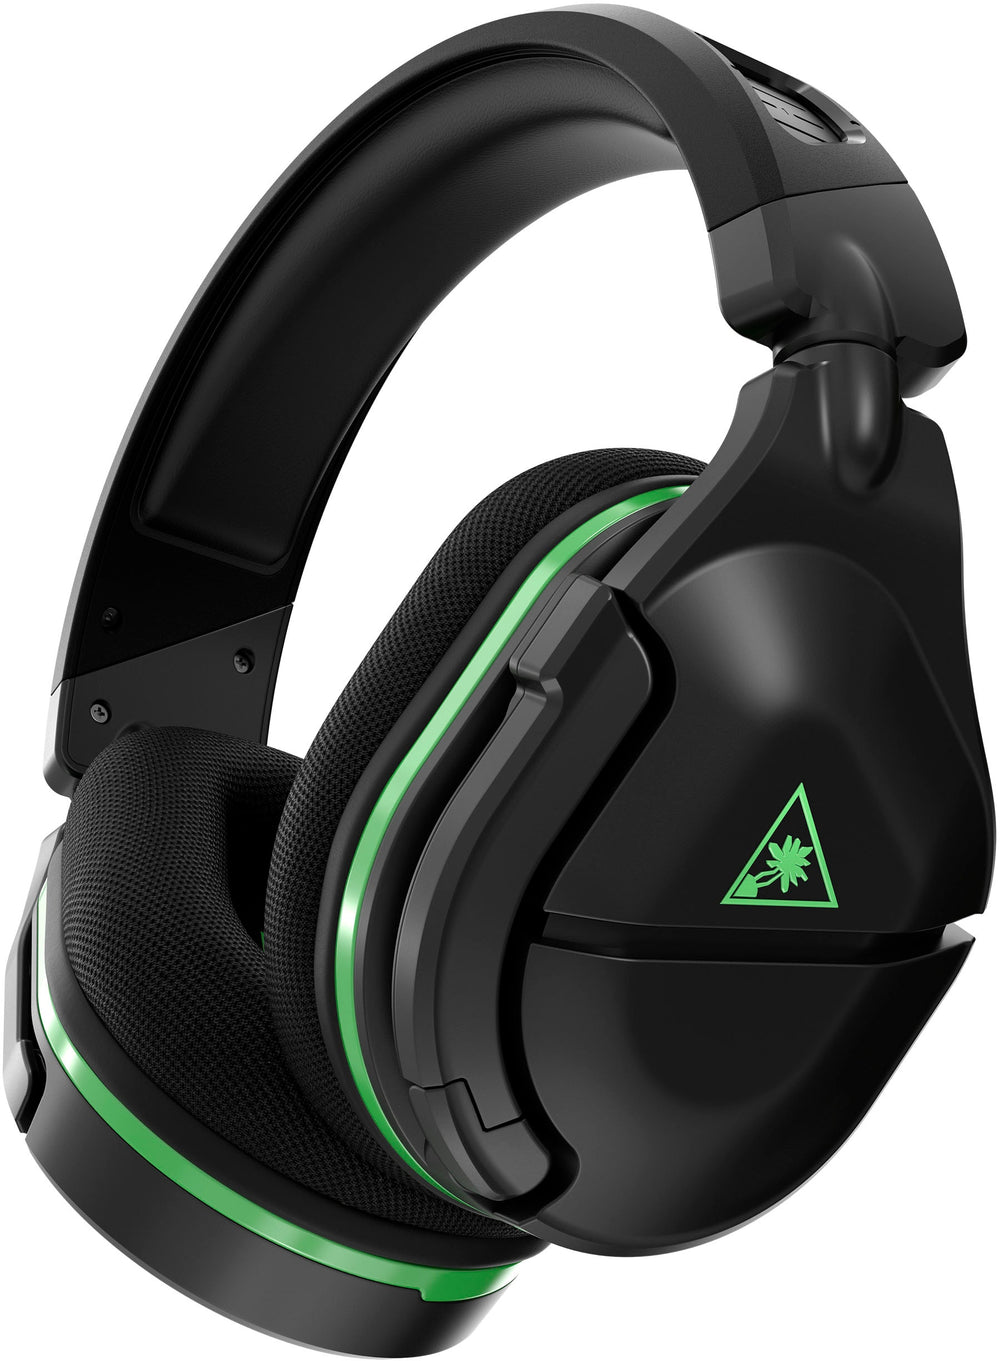 Turtle Beach - Stealth 600 Gen 2 USB Wireless Amplified Gaming Headset for Xbox Series X, Xbox Series S & Xbox One - 24 Hour Battery - Black/Green_1